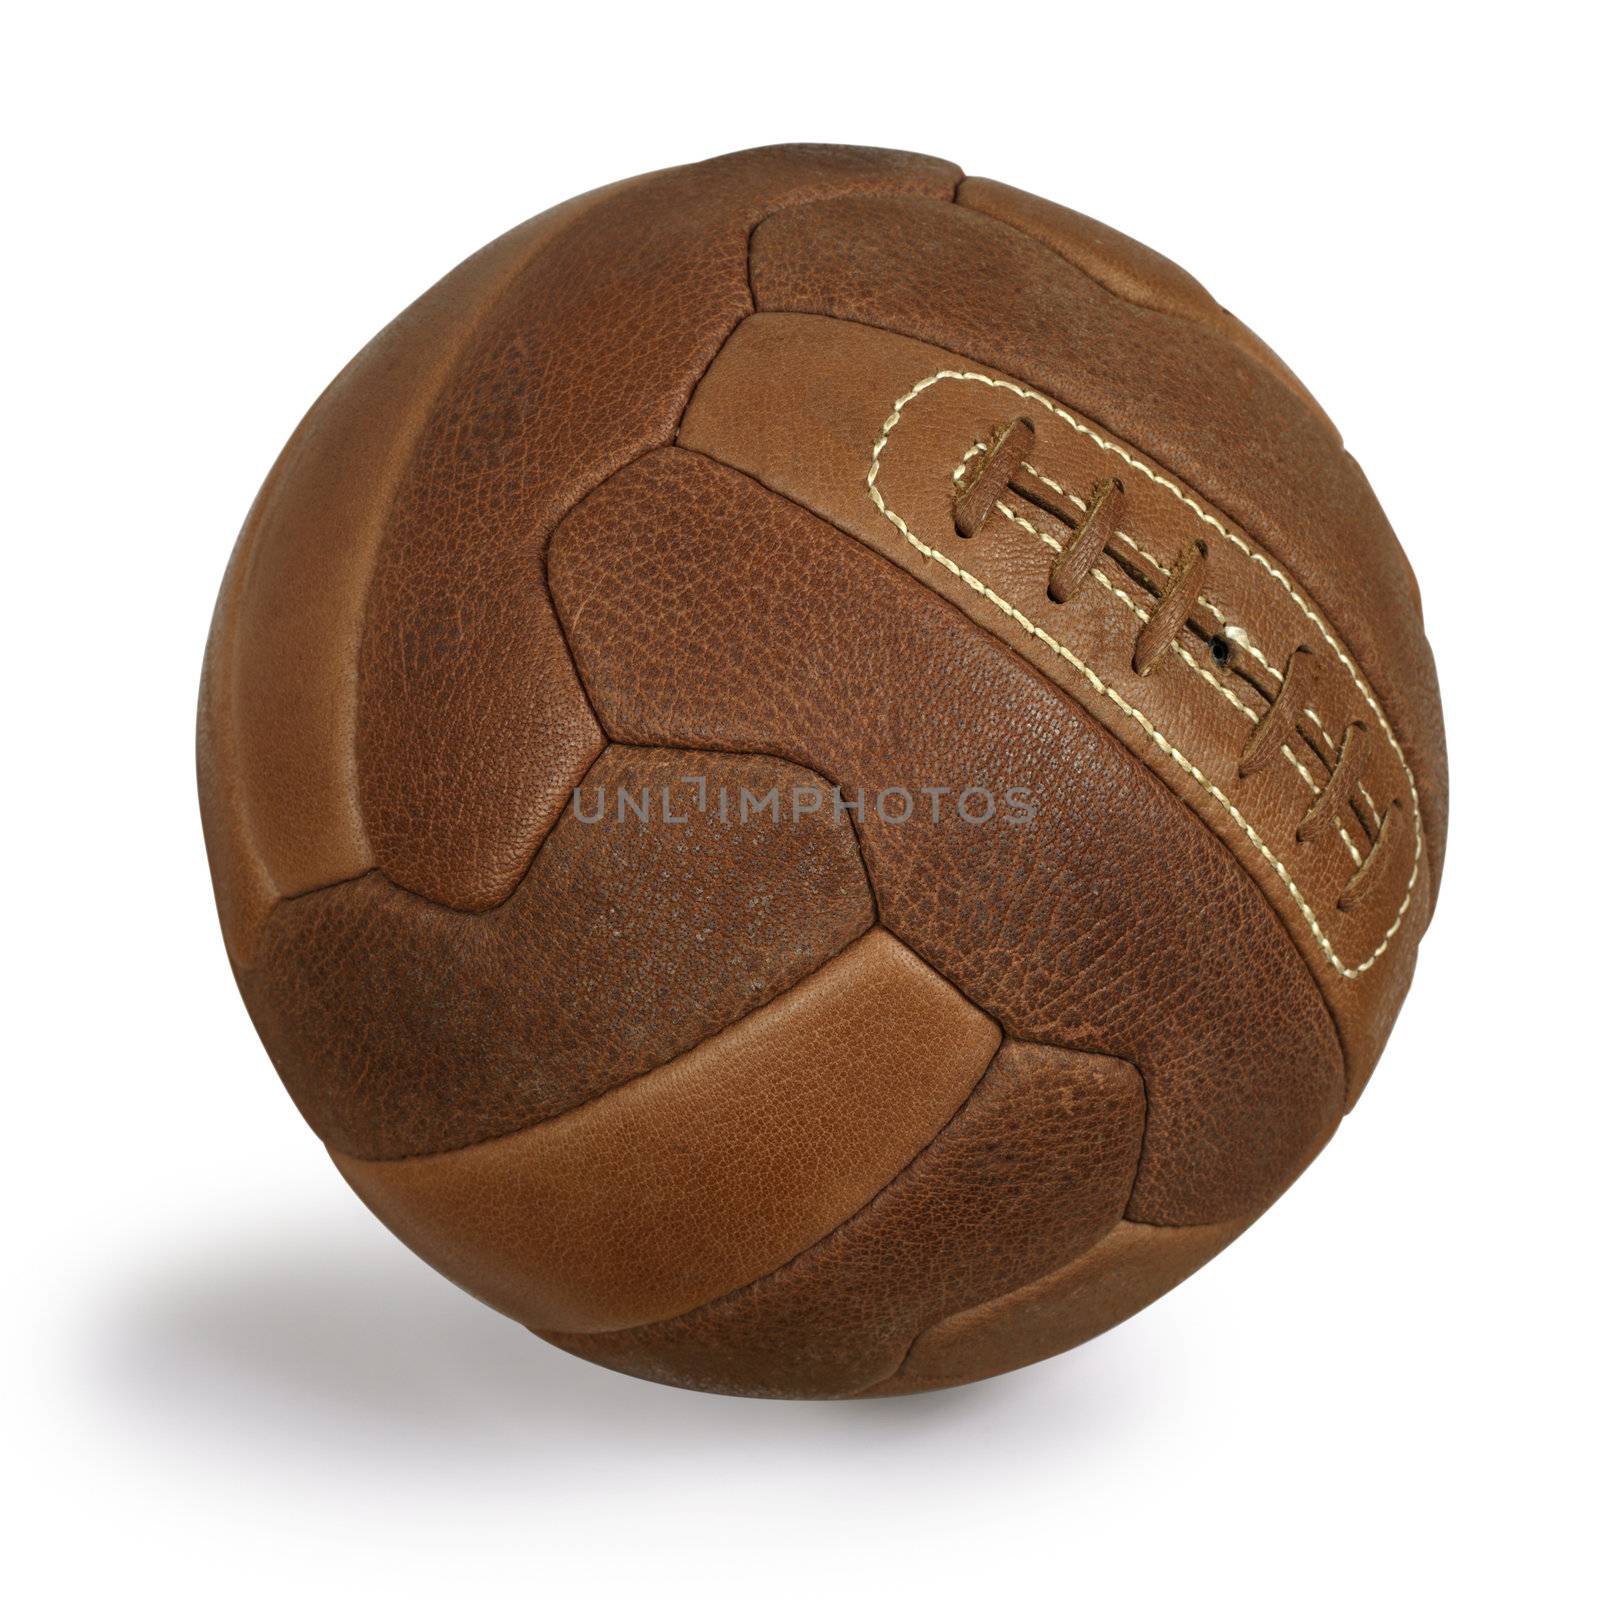 An isolated image of an old retro leather soccer ball.
